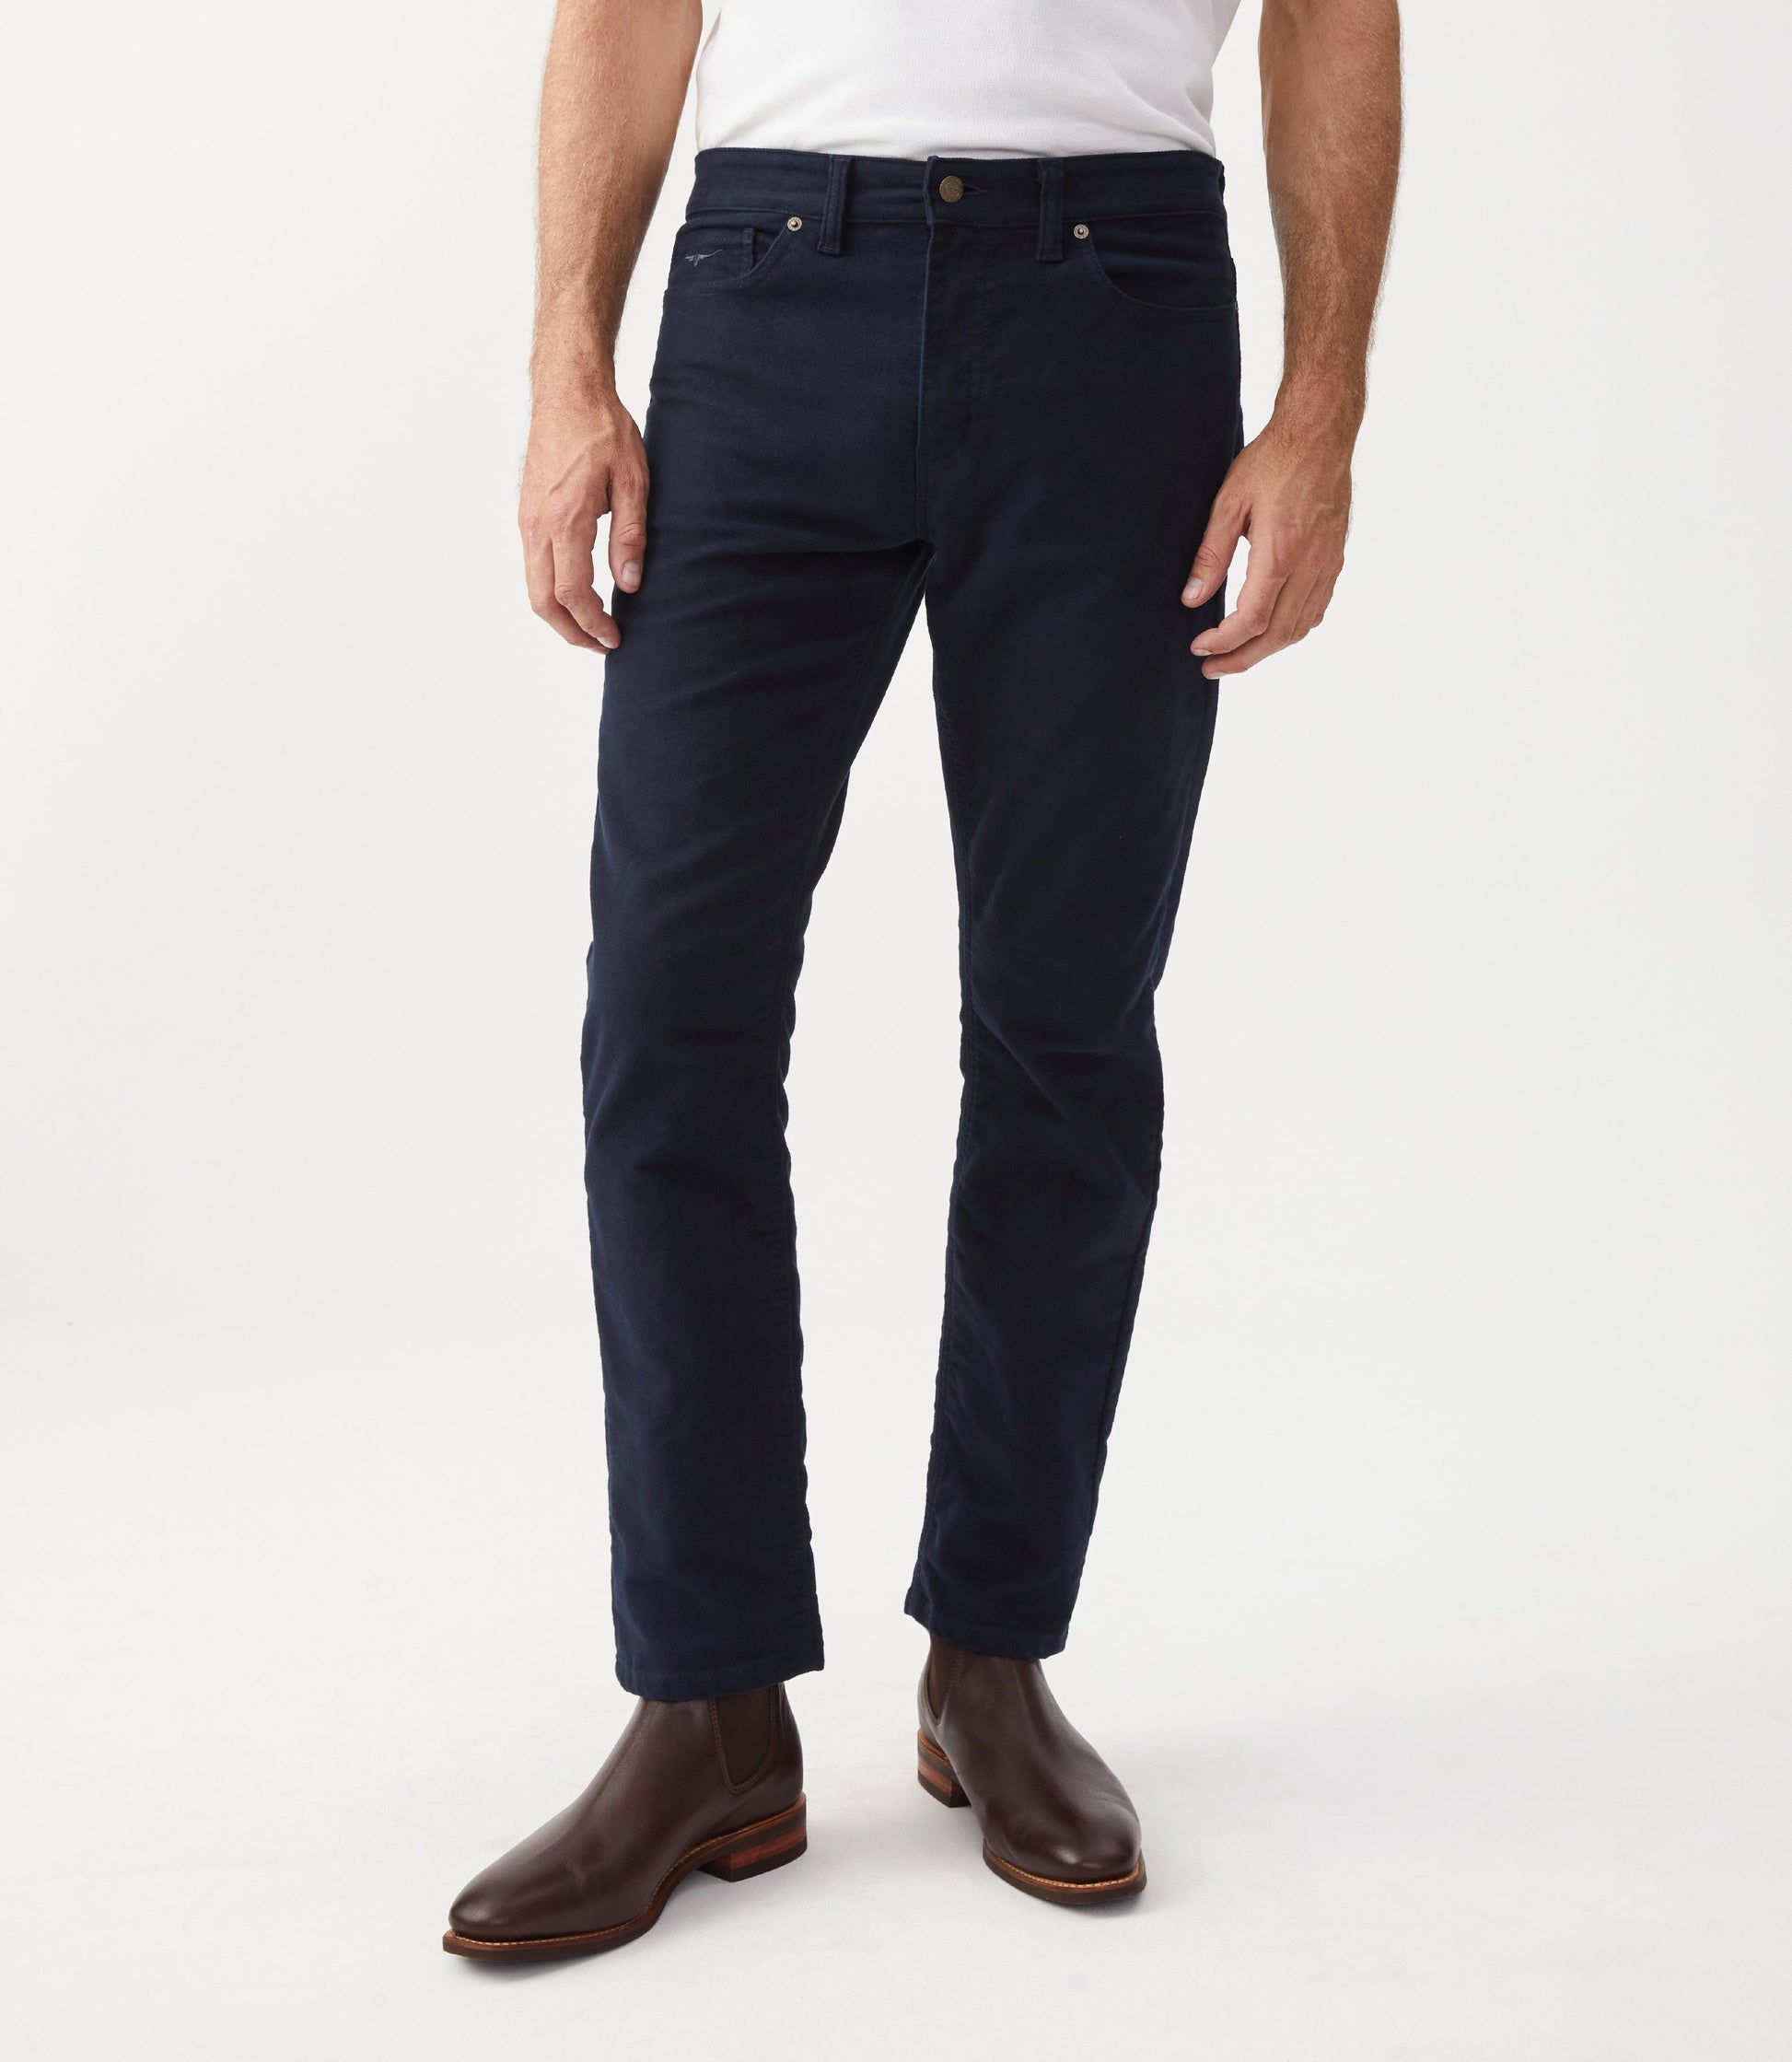 Ramco jean - navy Jeans R.M. WILLIAMS